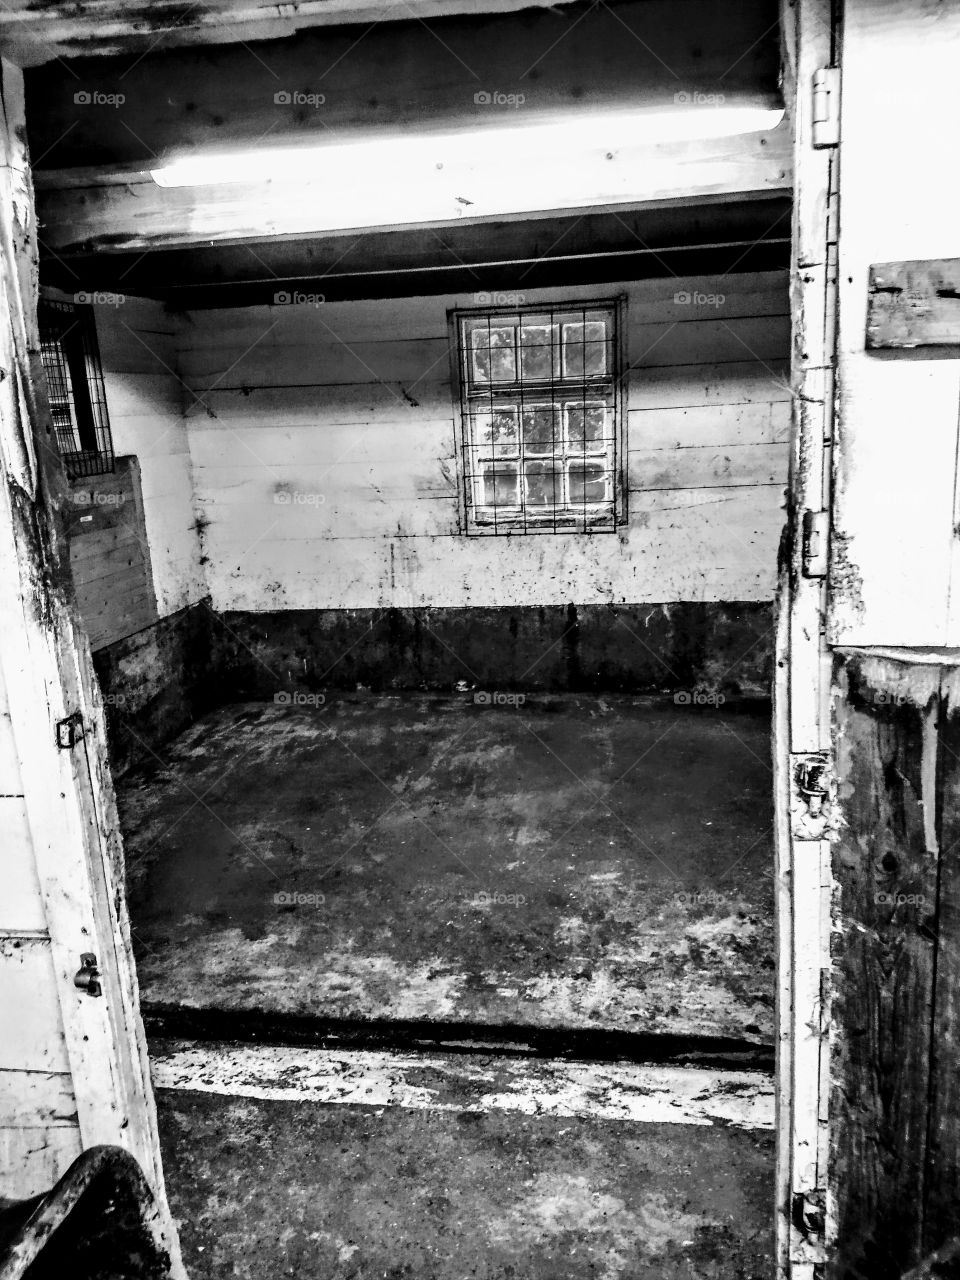 Dirty barn, looks better in black and white. Dirty walls and floor. What a mess!